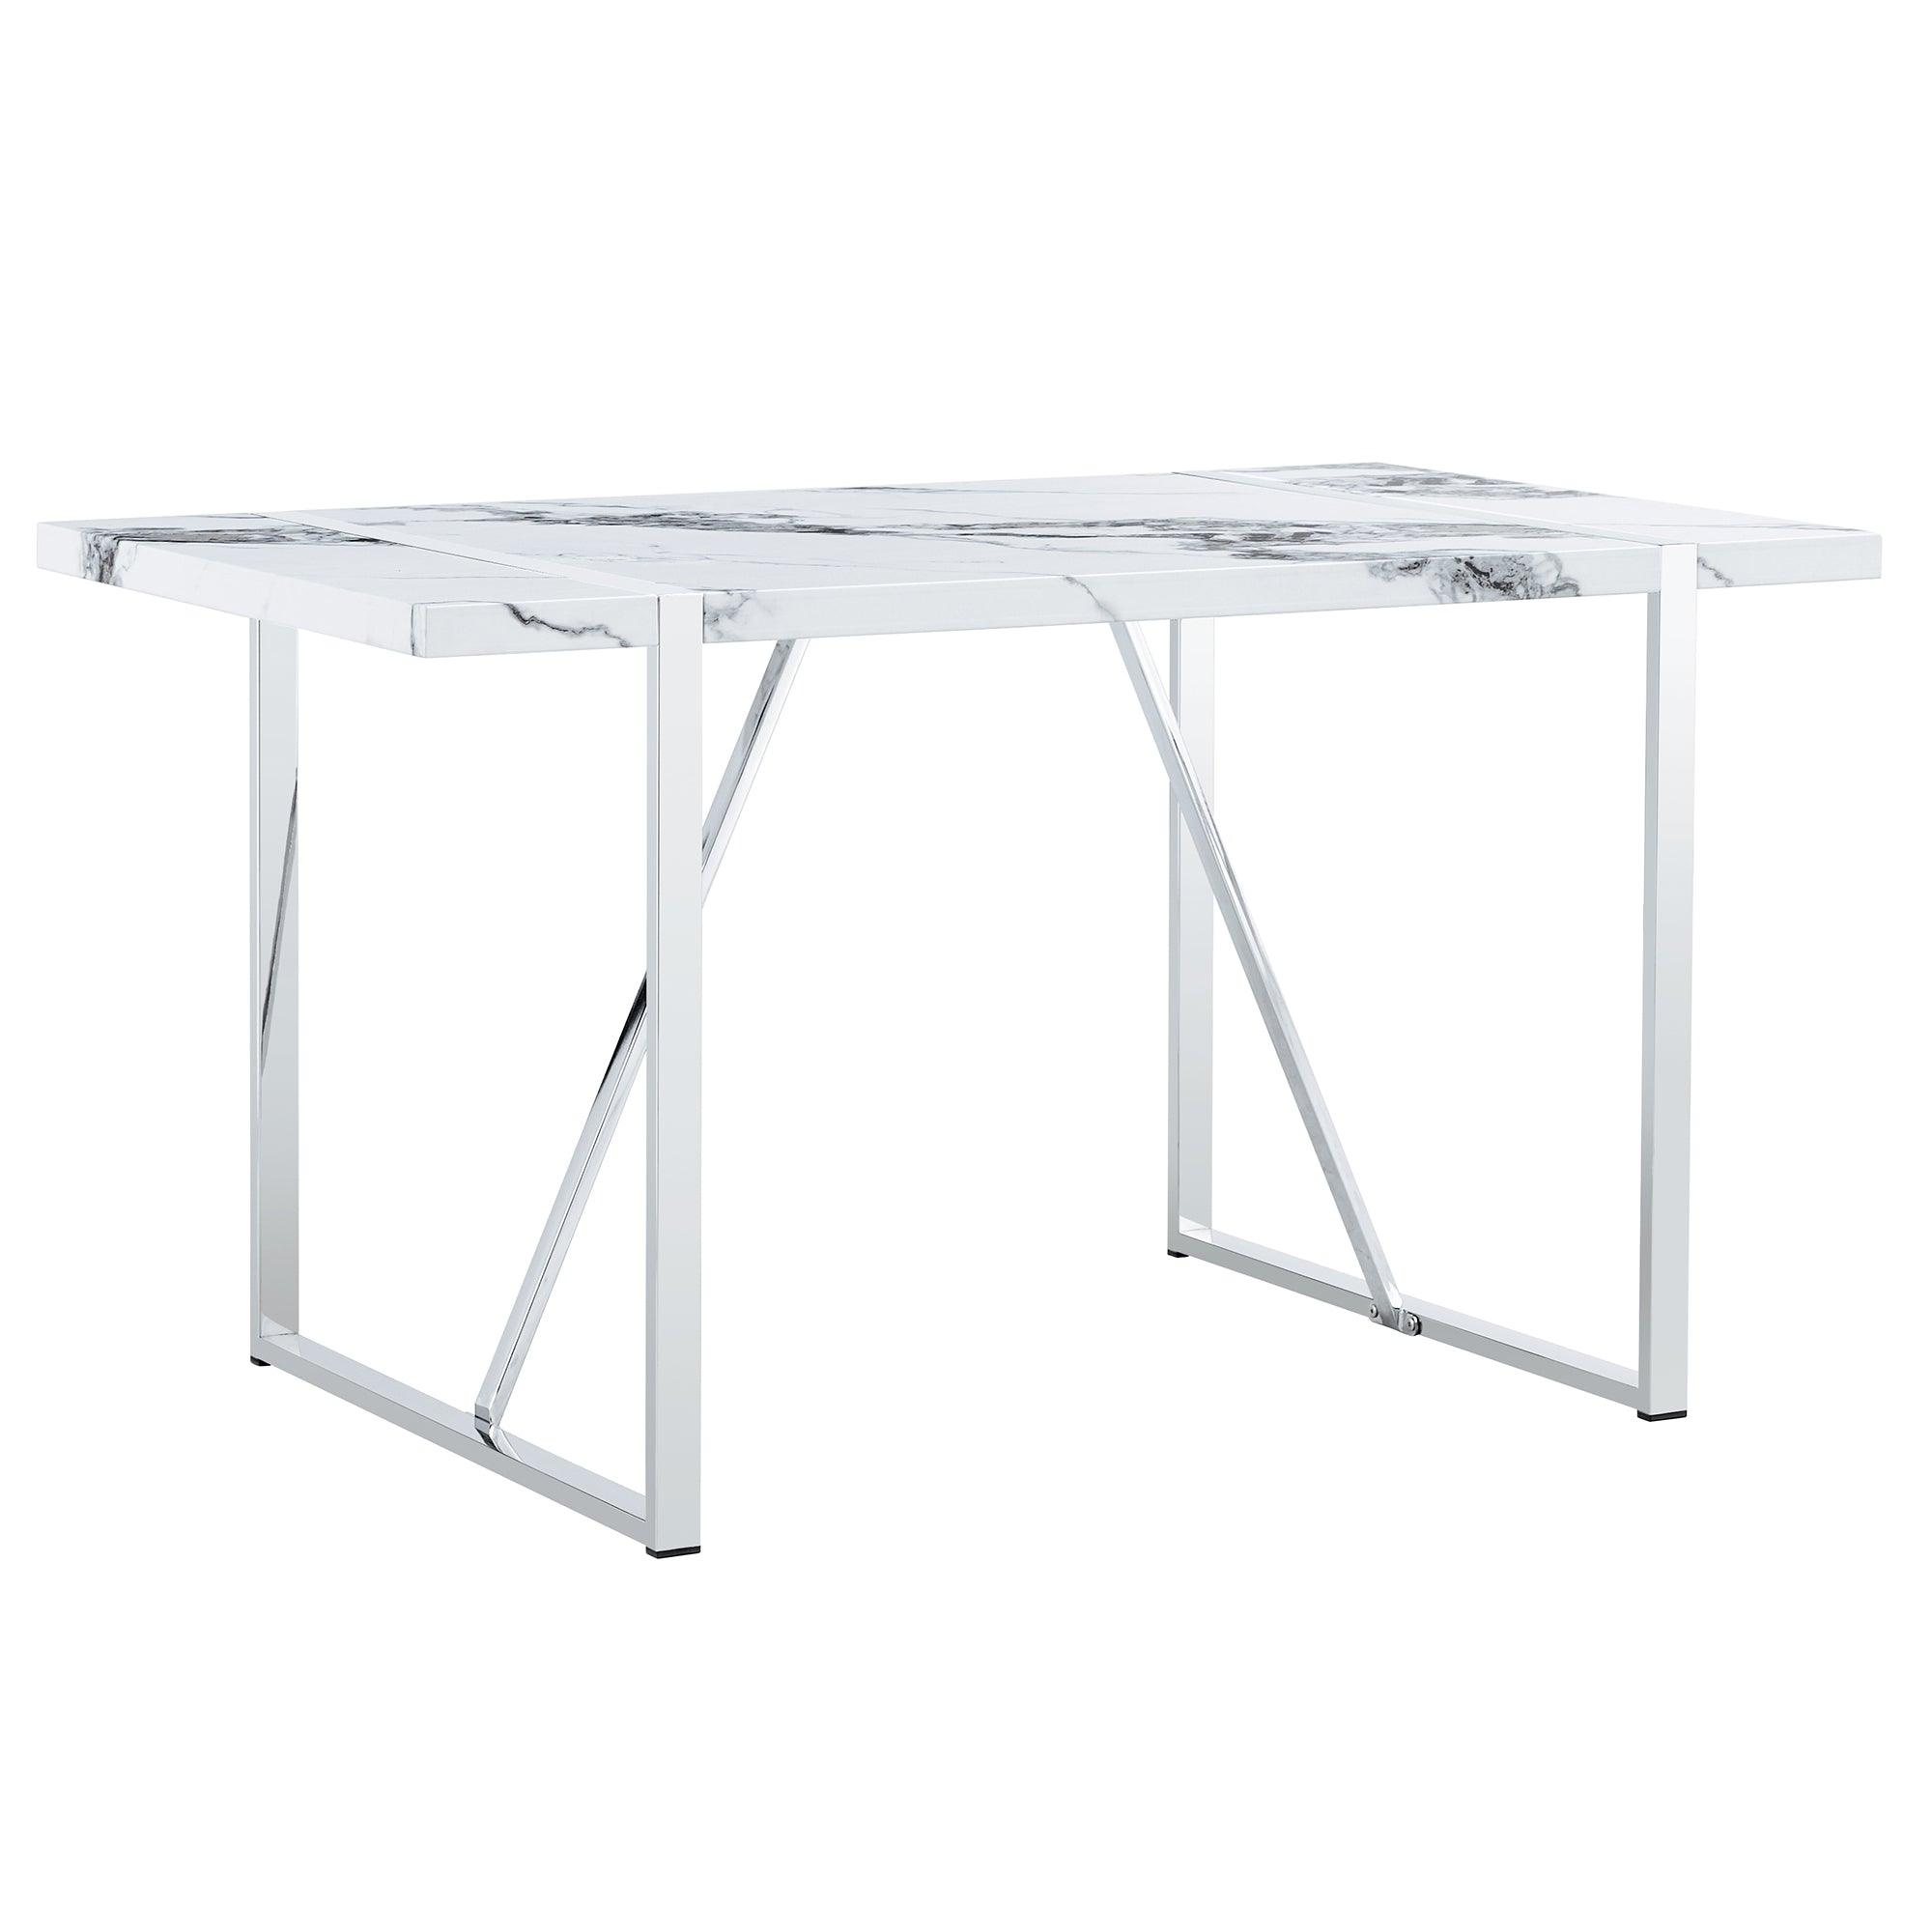 🆓🚛 Modern Dining Table, 55 Inch Faux Marble Kitchen Table for 4 People, Rectangular Dinner Table for Dining Room, Home Office, Living Room Furniture, Easy Assembly, White & Silver